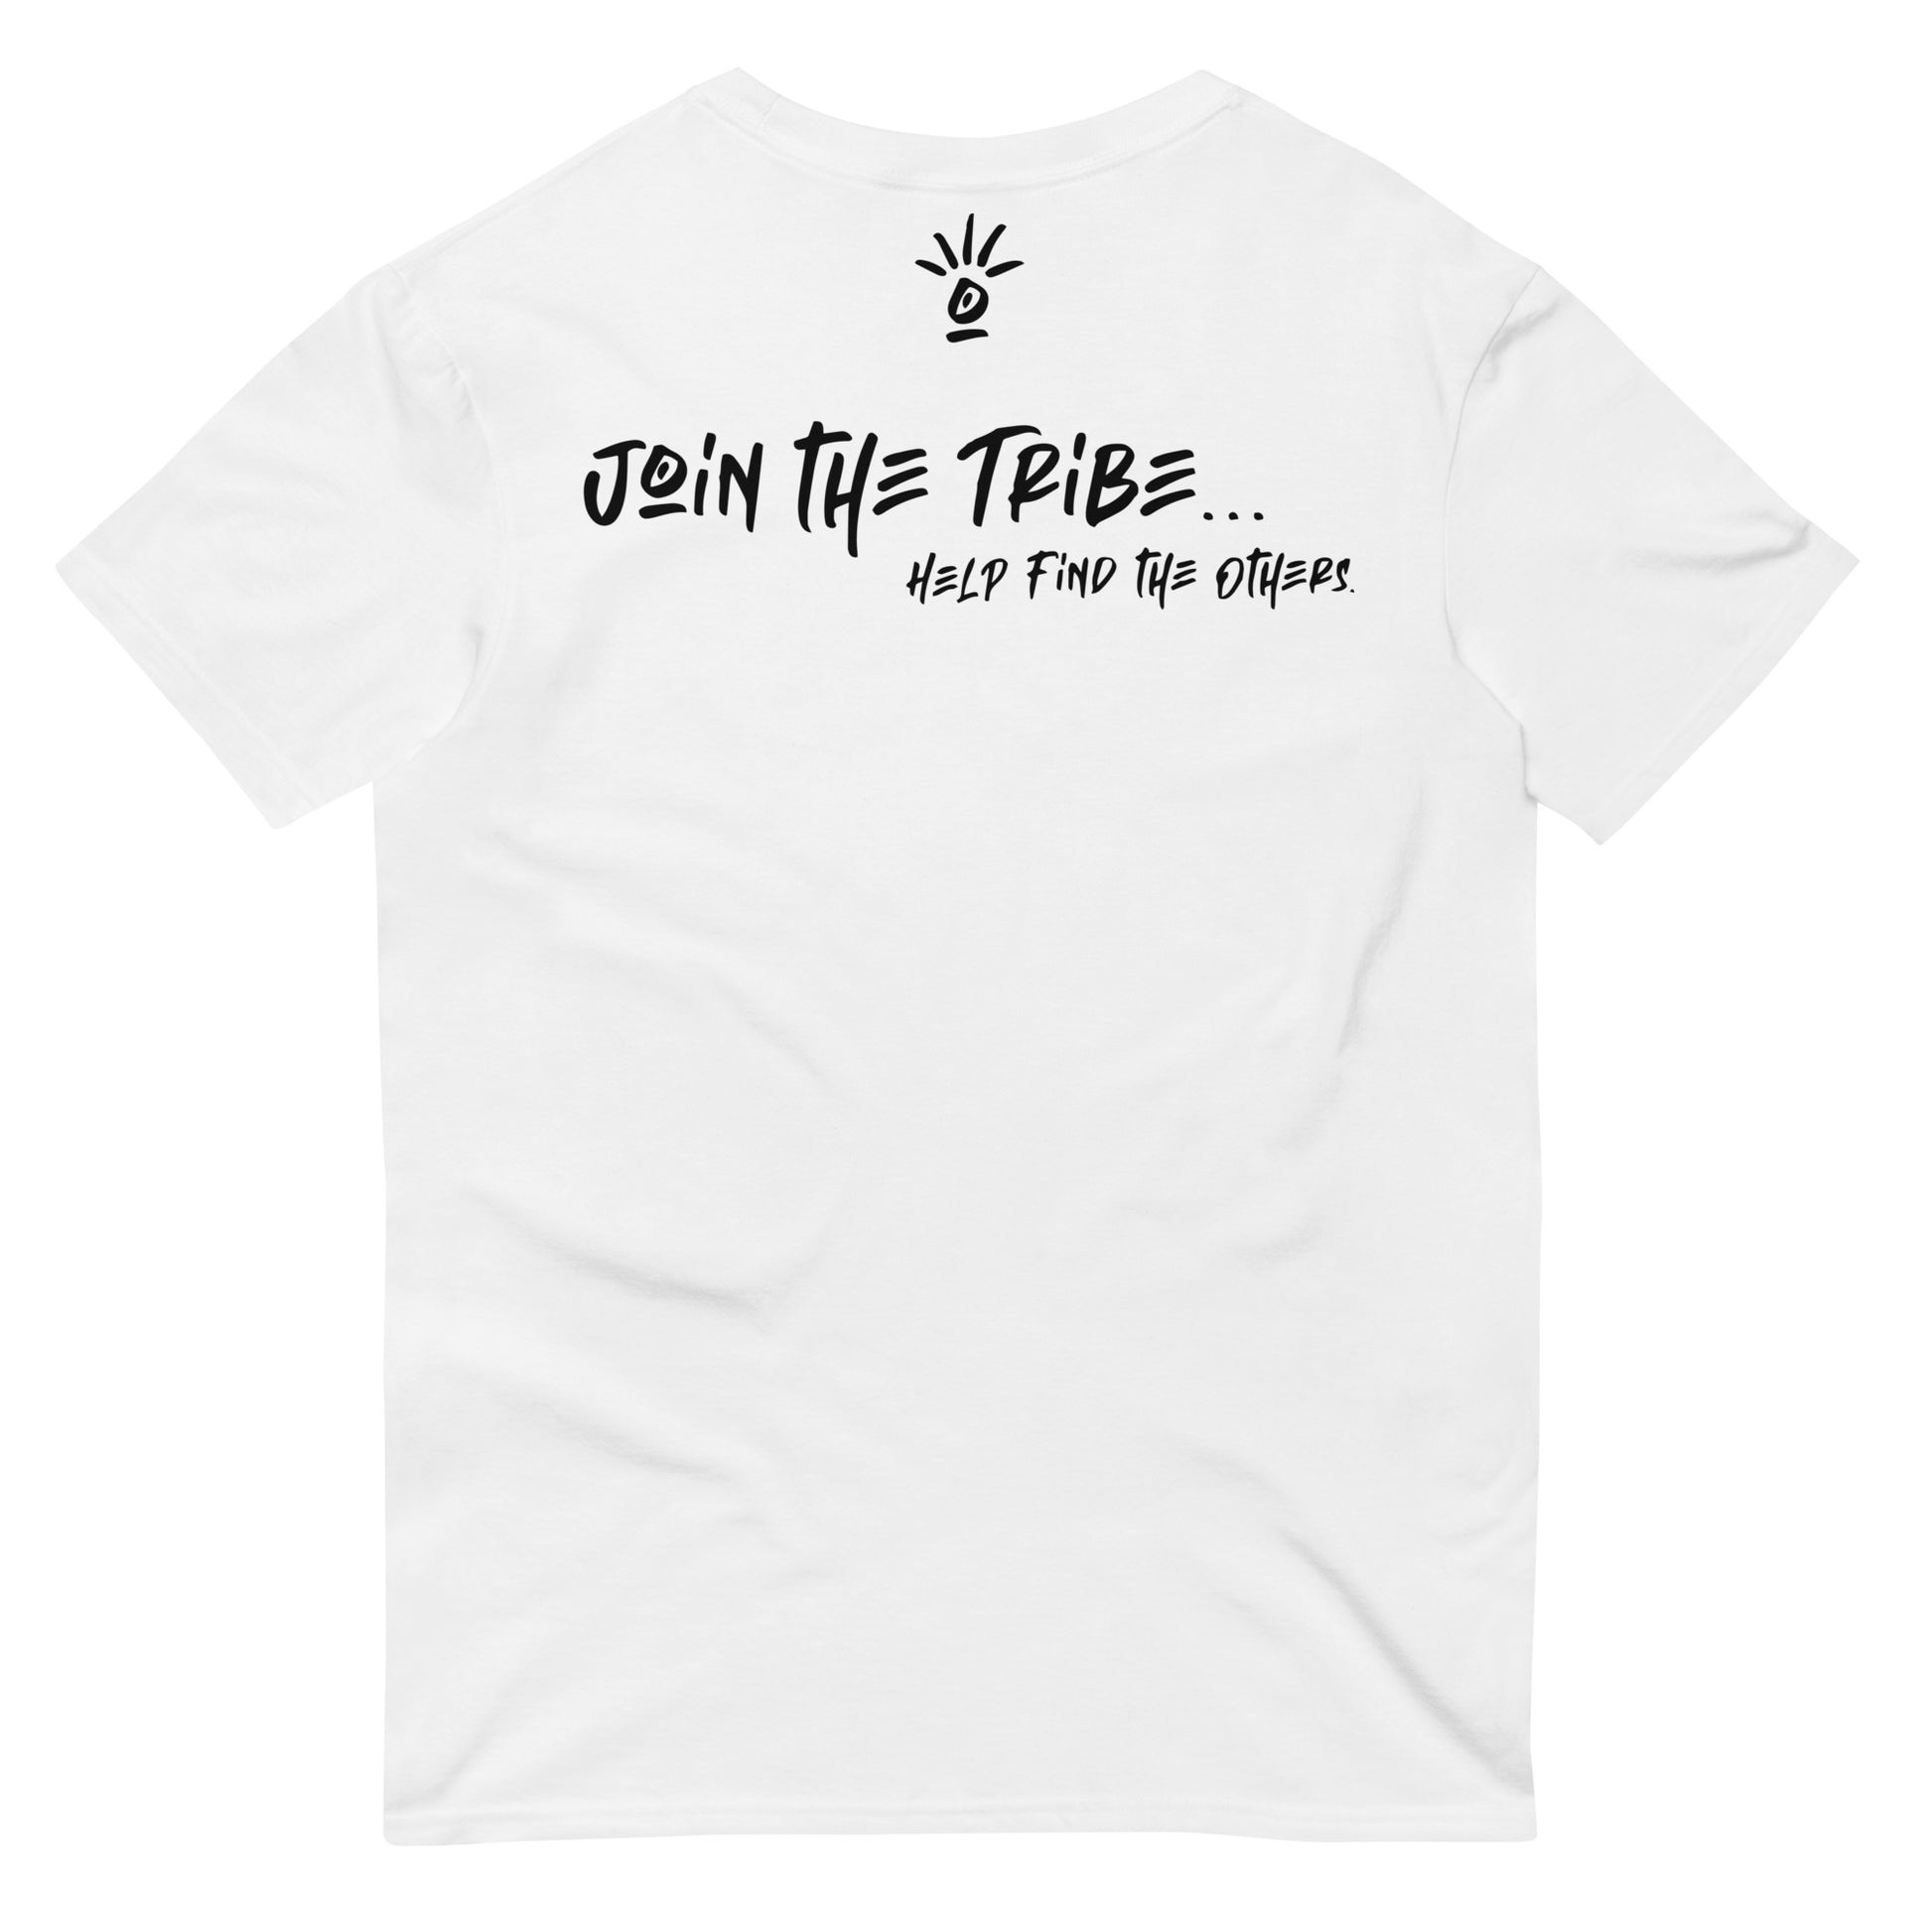 Image of 'Join The Tribe' unisex T-shirt from Tribe of Weirdos, featuring bold text promoting unity and inner peace on a stylish, casual fit.